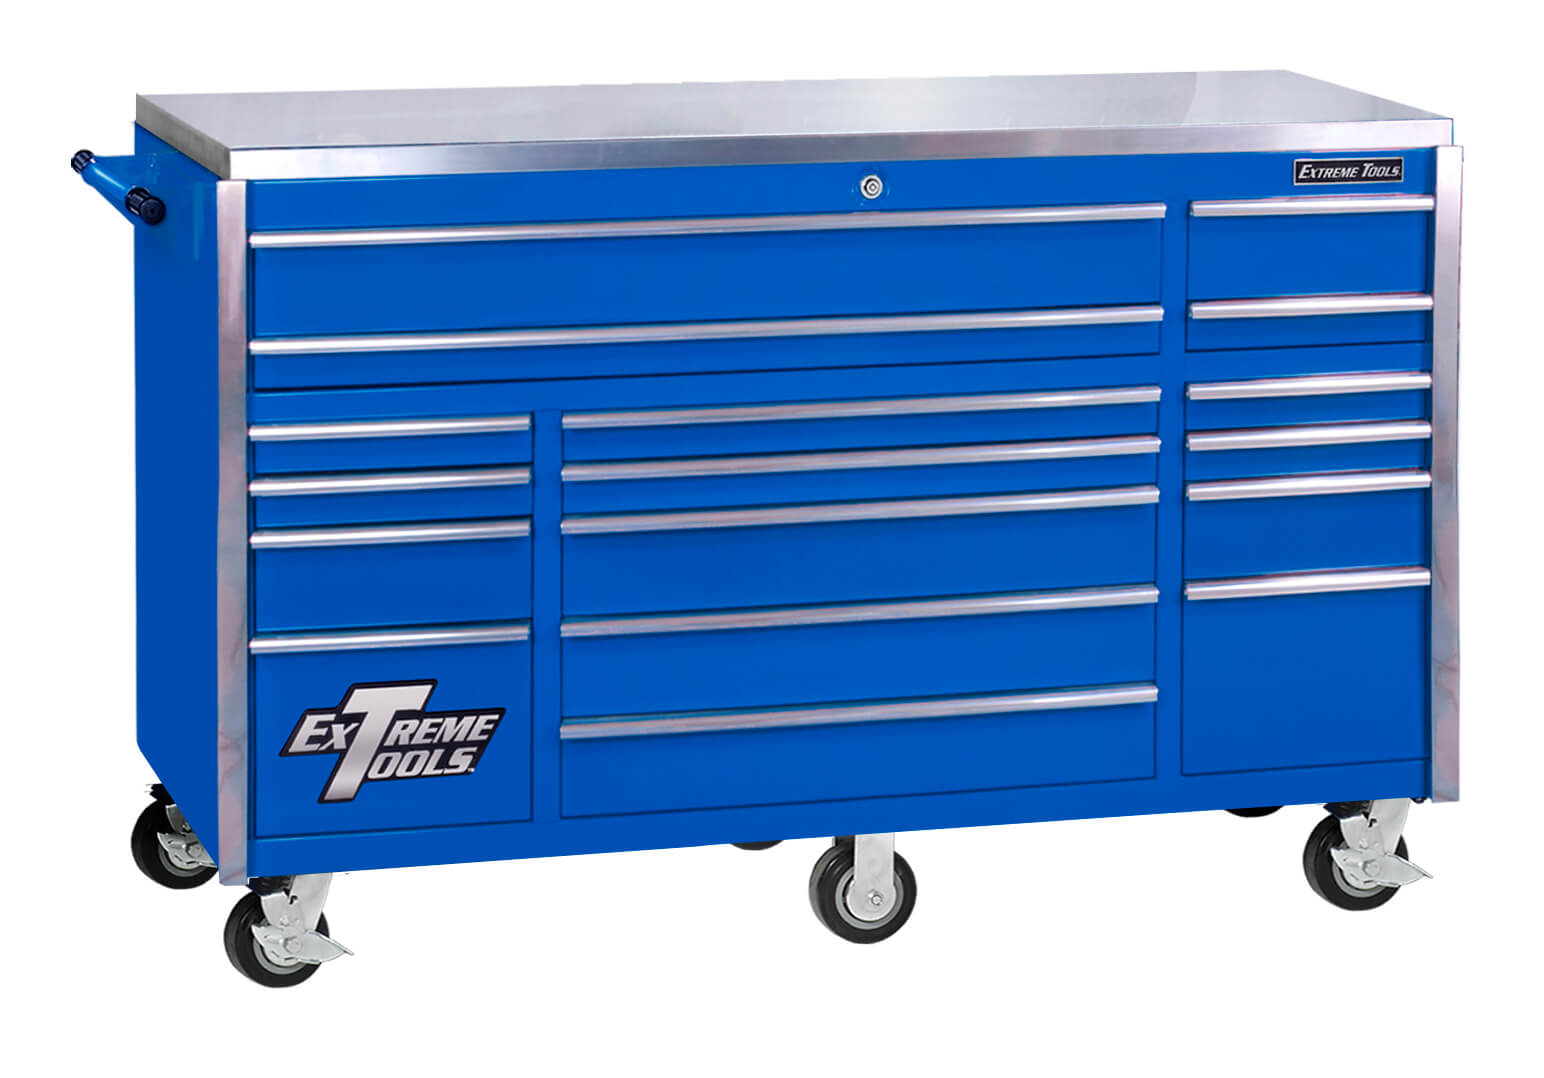 EXTREME TOOLS® 72 inch 17 DRAWER TRIPLE BANK PROFESSIONAL ROLLER CABINET